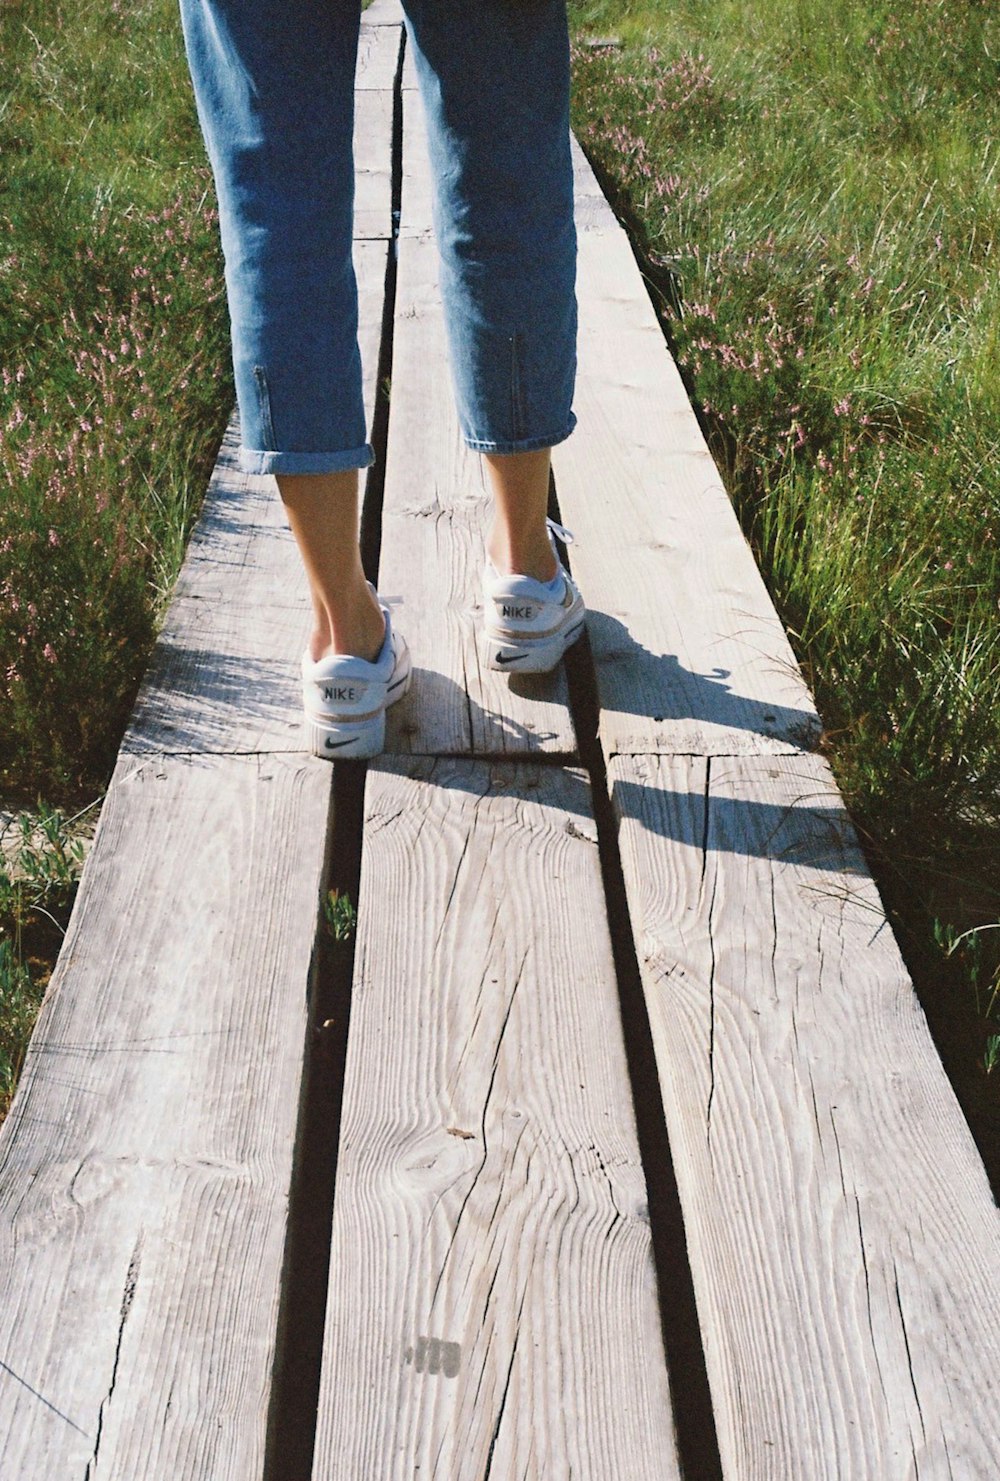 a person walking on a wooden walkway in the grass